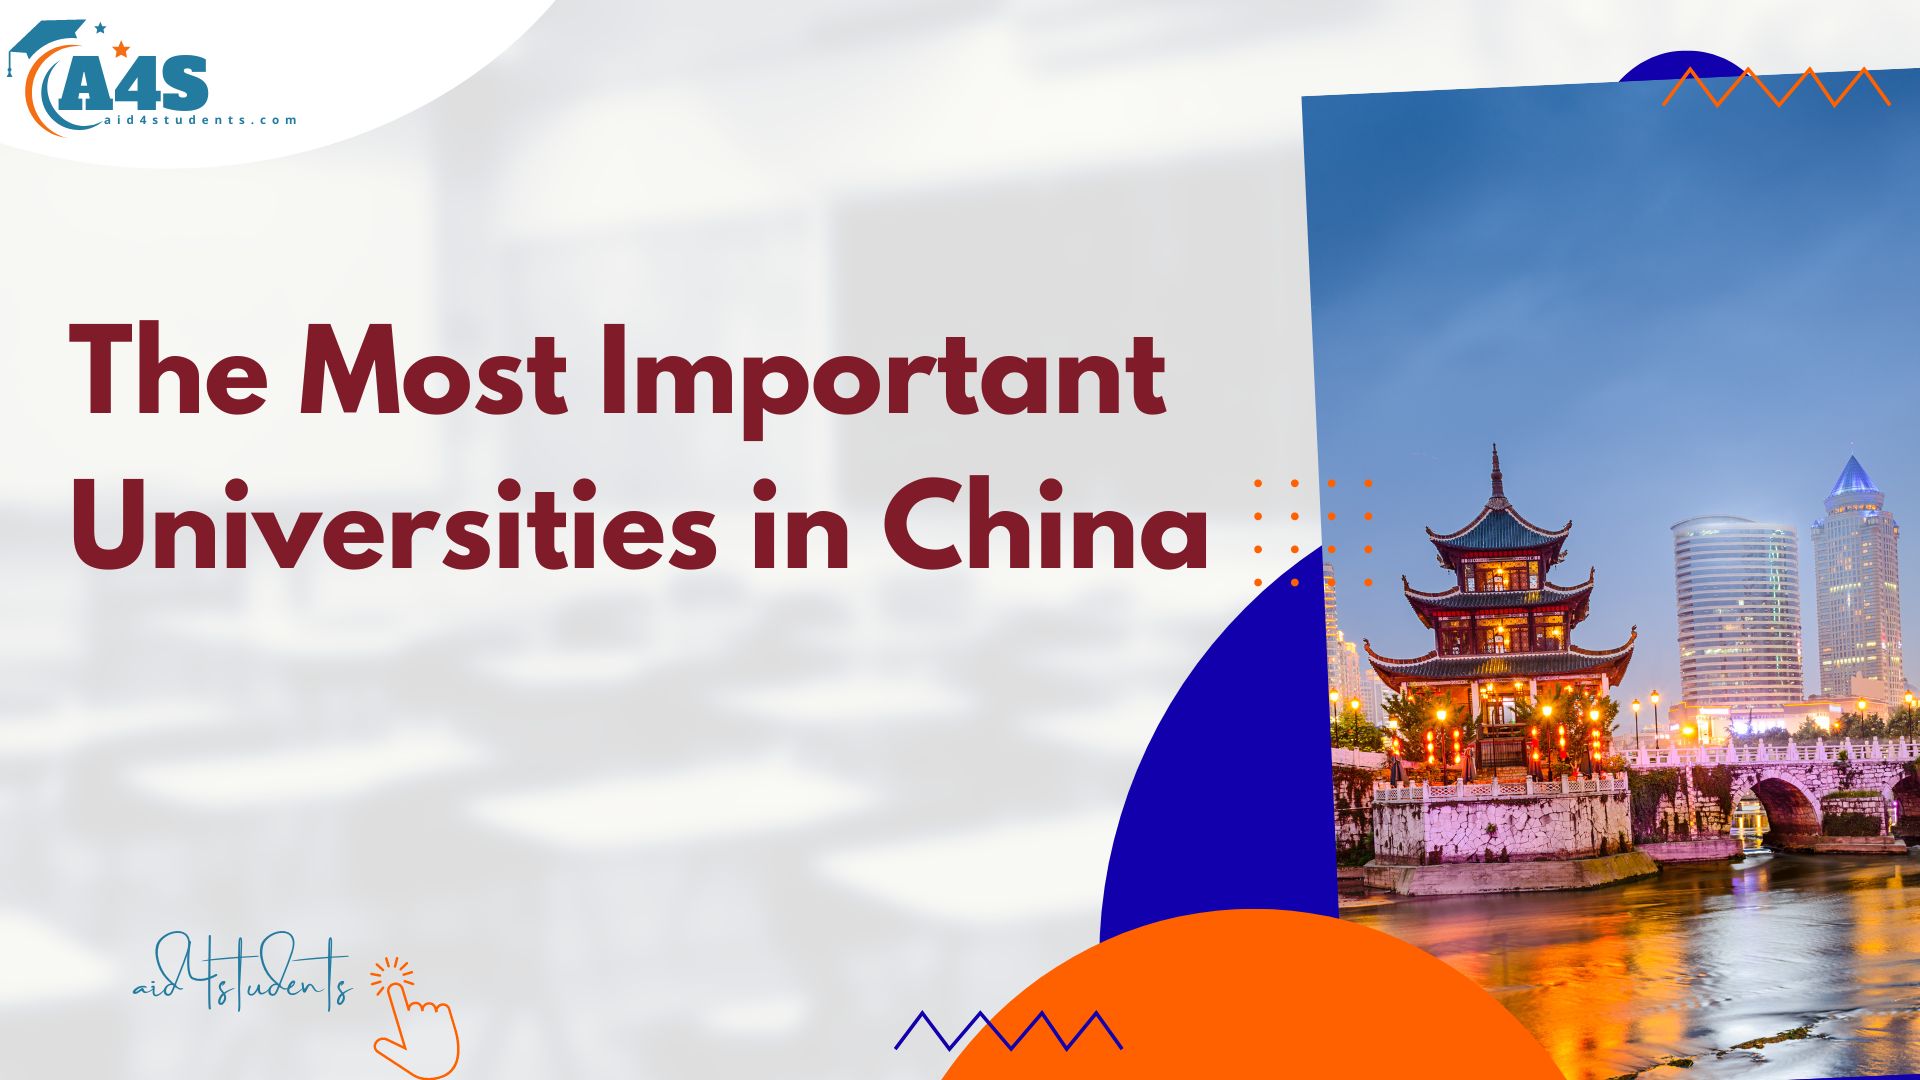 The Most Important Universities in China